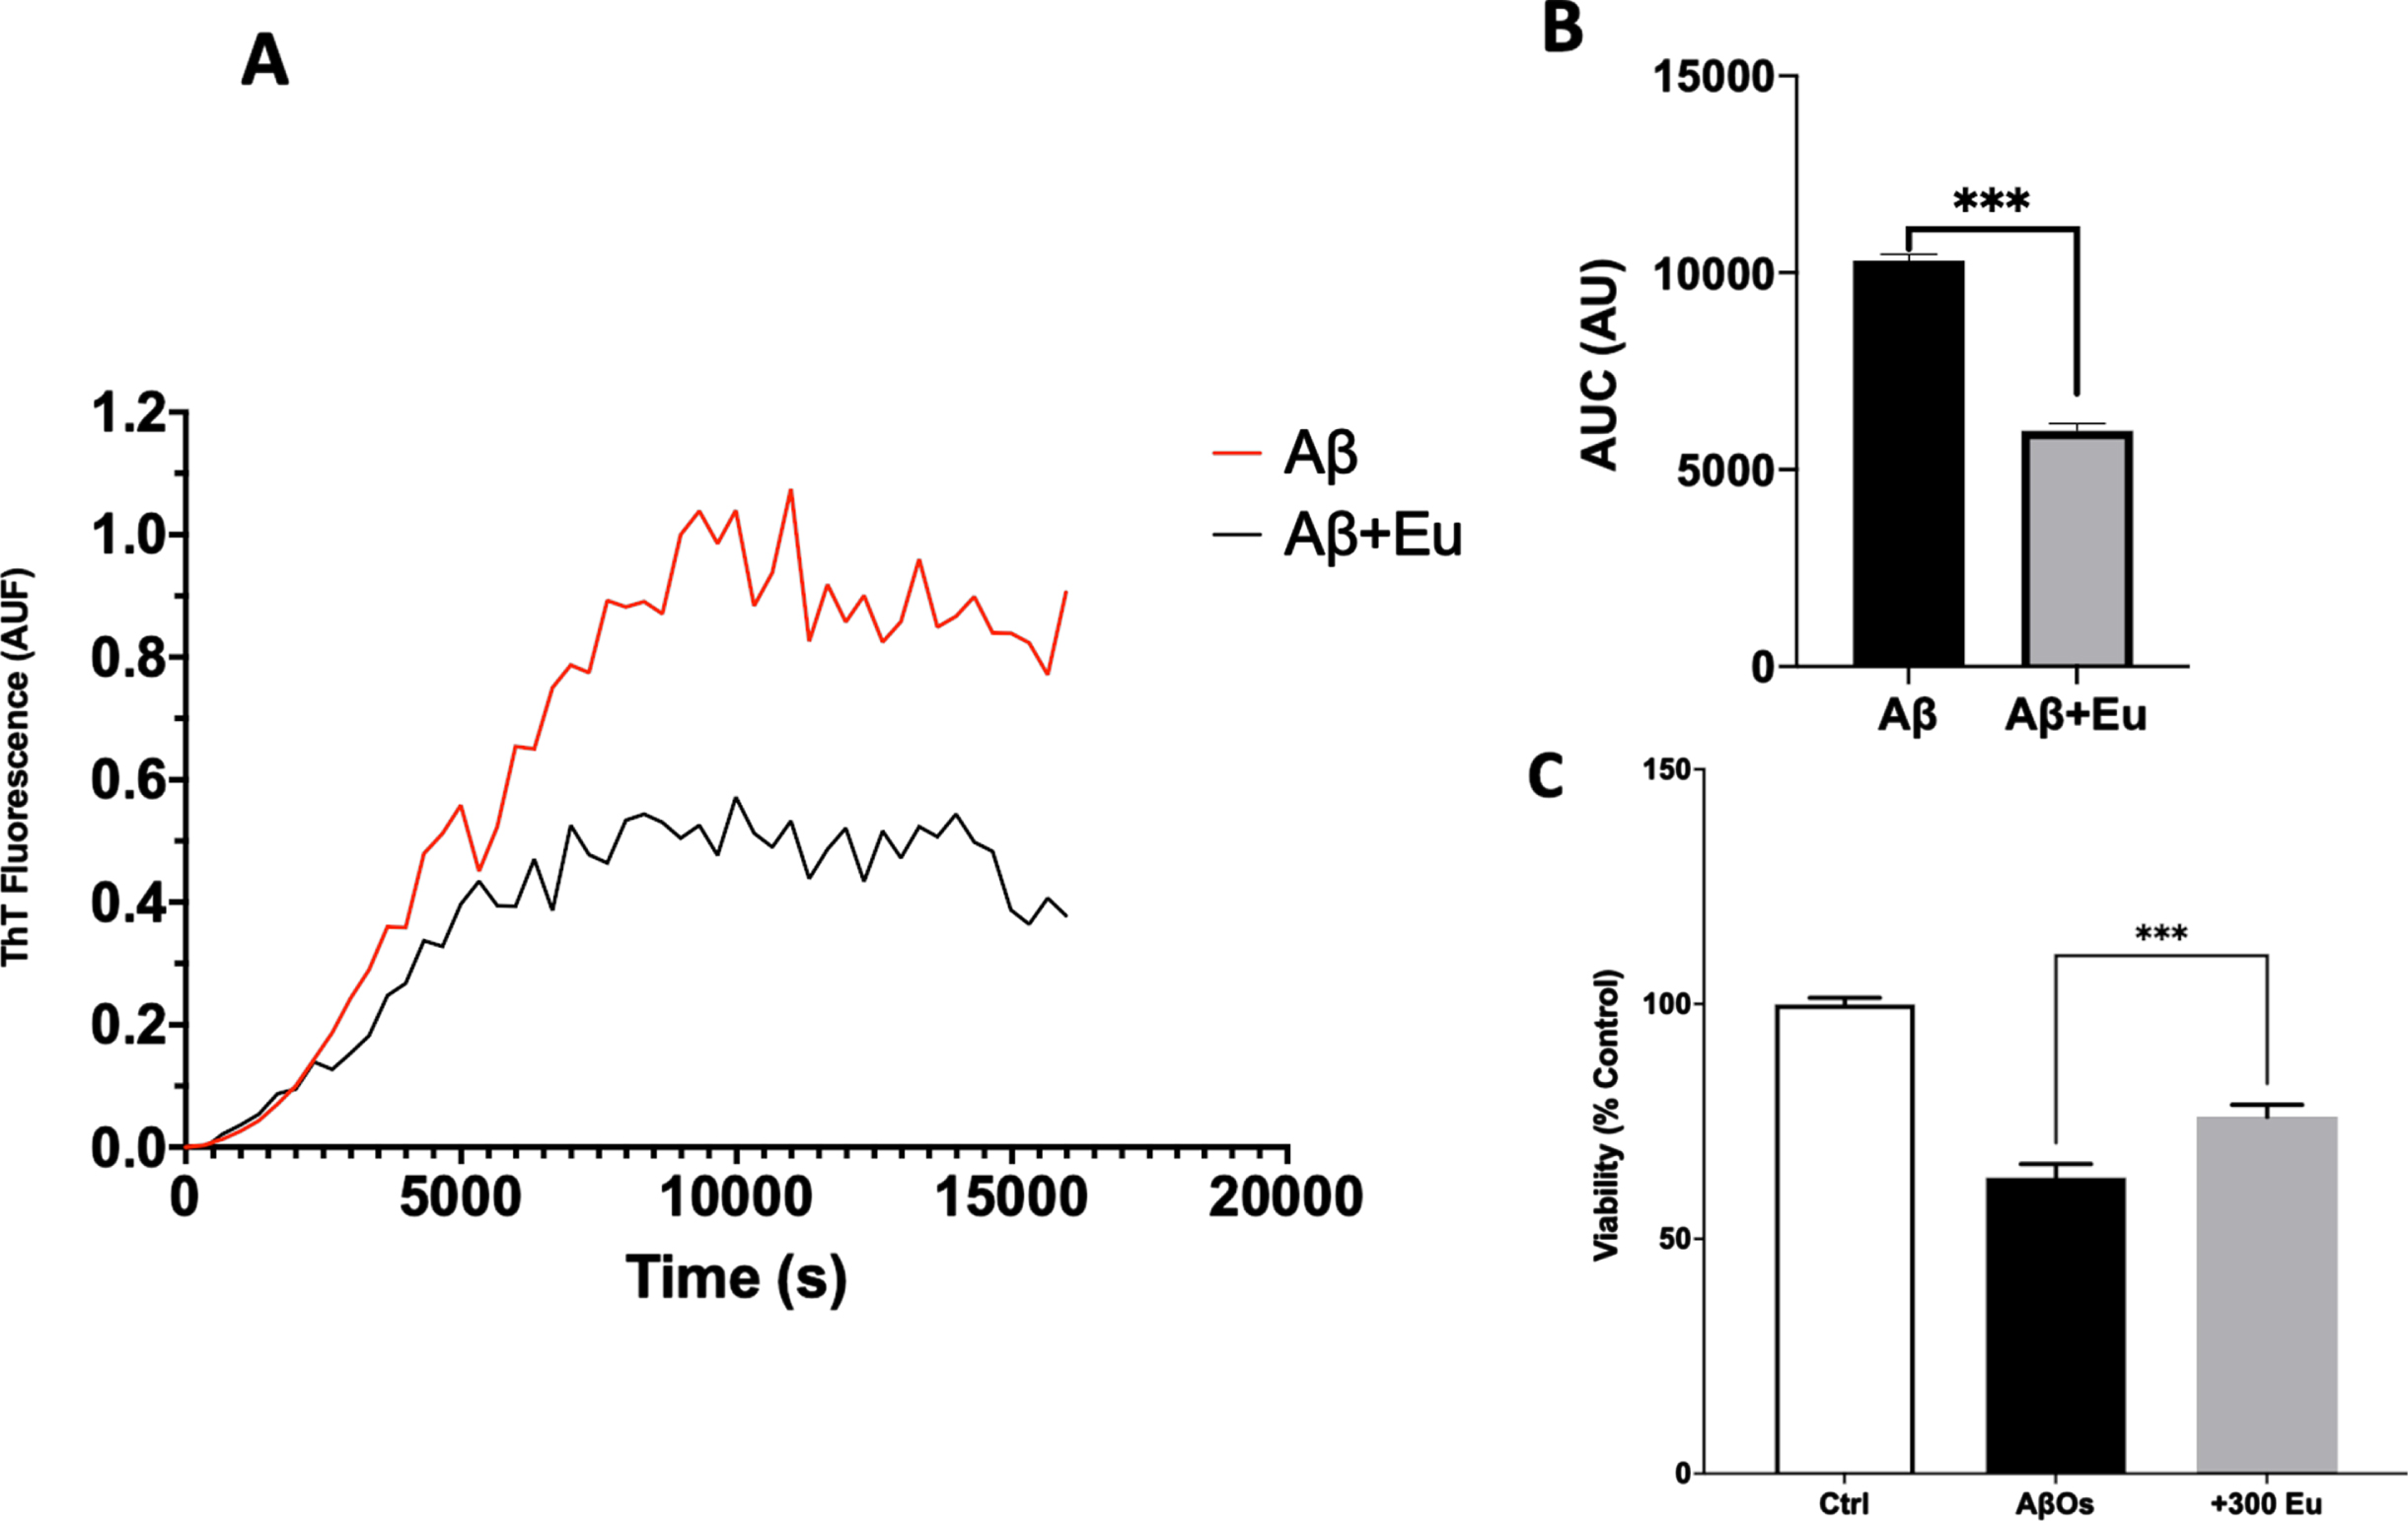 Eudesmin effects on Aβ aggregation depends on concentration. Aβ1-40 (80μM) aggregation was measured using Thioflavin T (ThT 20μM) evaluating fluorescence every 3 min for 350 min at 37°C, in absence of Eudesmin 300 nM (red) or in presence (black) (A). Area under curve quantification (arbitrary units) shown the effect of Eudesmin over the background fluorescence of ThT (B). Viability quantification evaluated on PC12 cells using MTT to compare response against AβOs or AβOs+Eu (300 nM) (C). Values are mean±SEM, n = 3 using one-way ANOVA and Tukey or Welch’s test. ***p < 0.001.